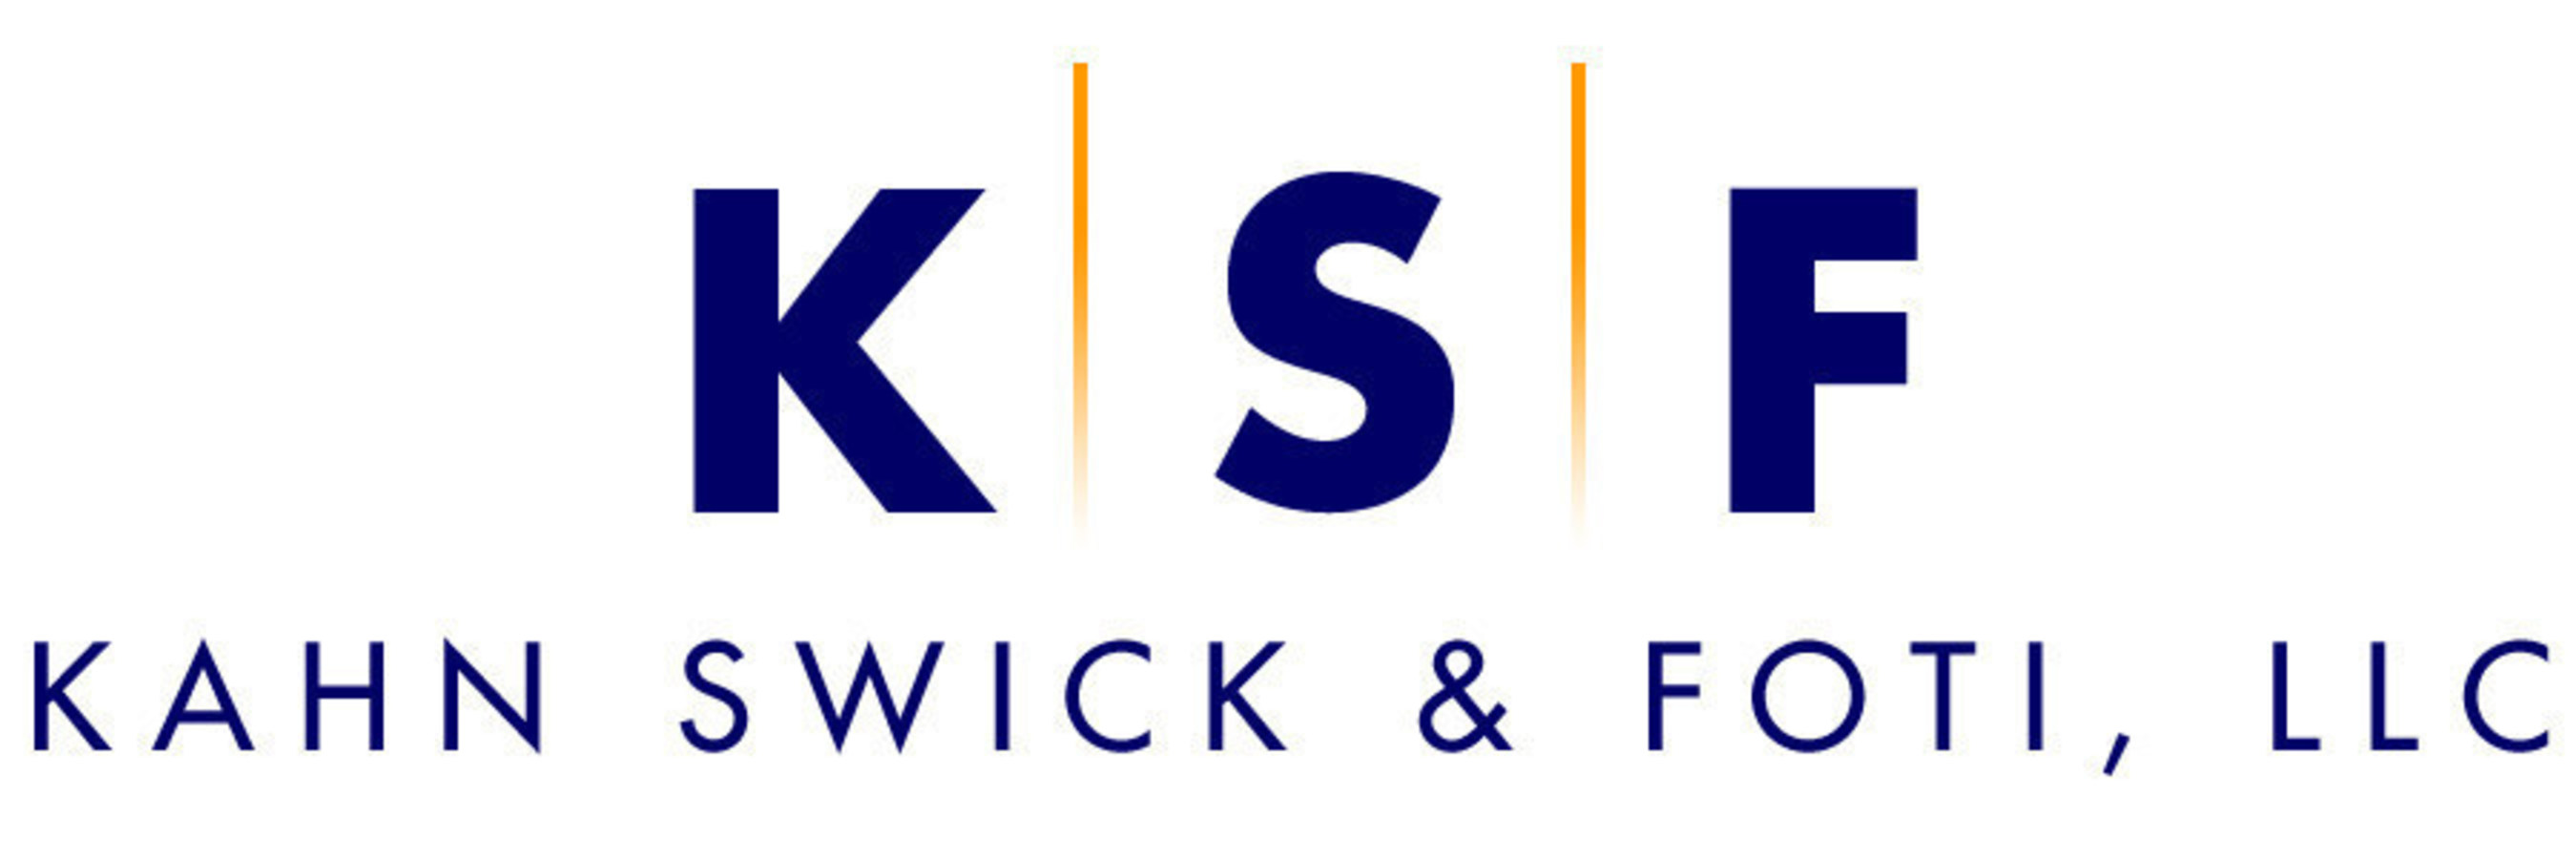 Kahn Swick & Foti, LLC ("KSF") - - not all law firms are created equal. Visit www.ksfcounsel.com to learn more about KSF.